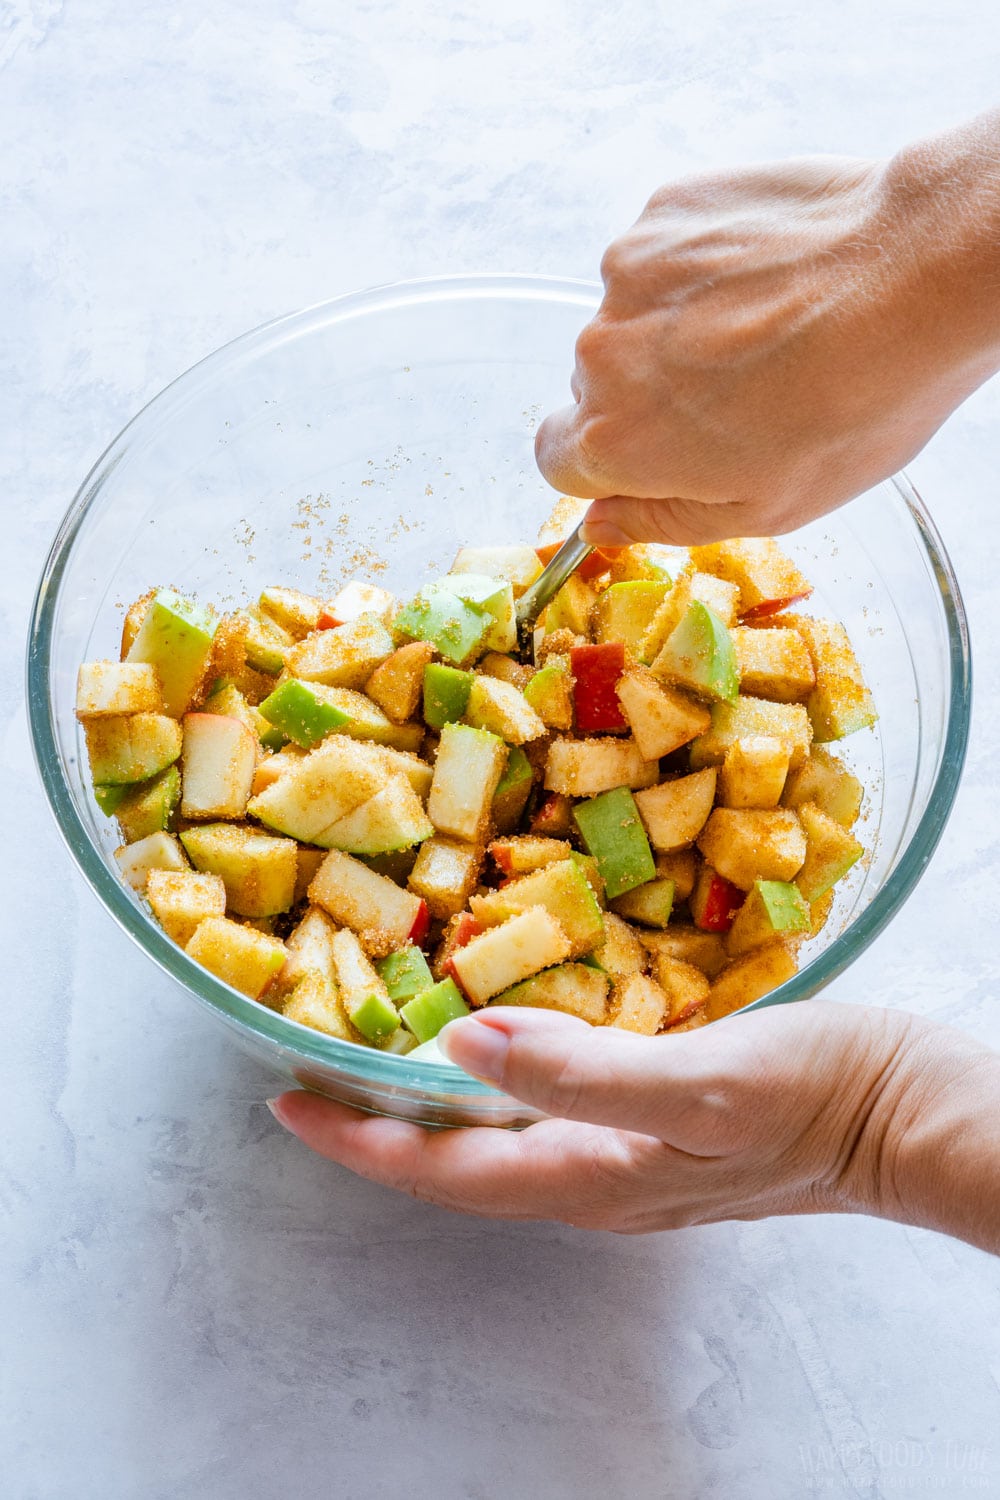 Mixing diced apples with brown sugar in the glass bowl.